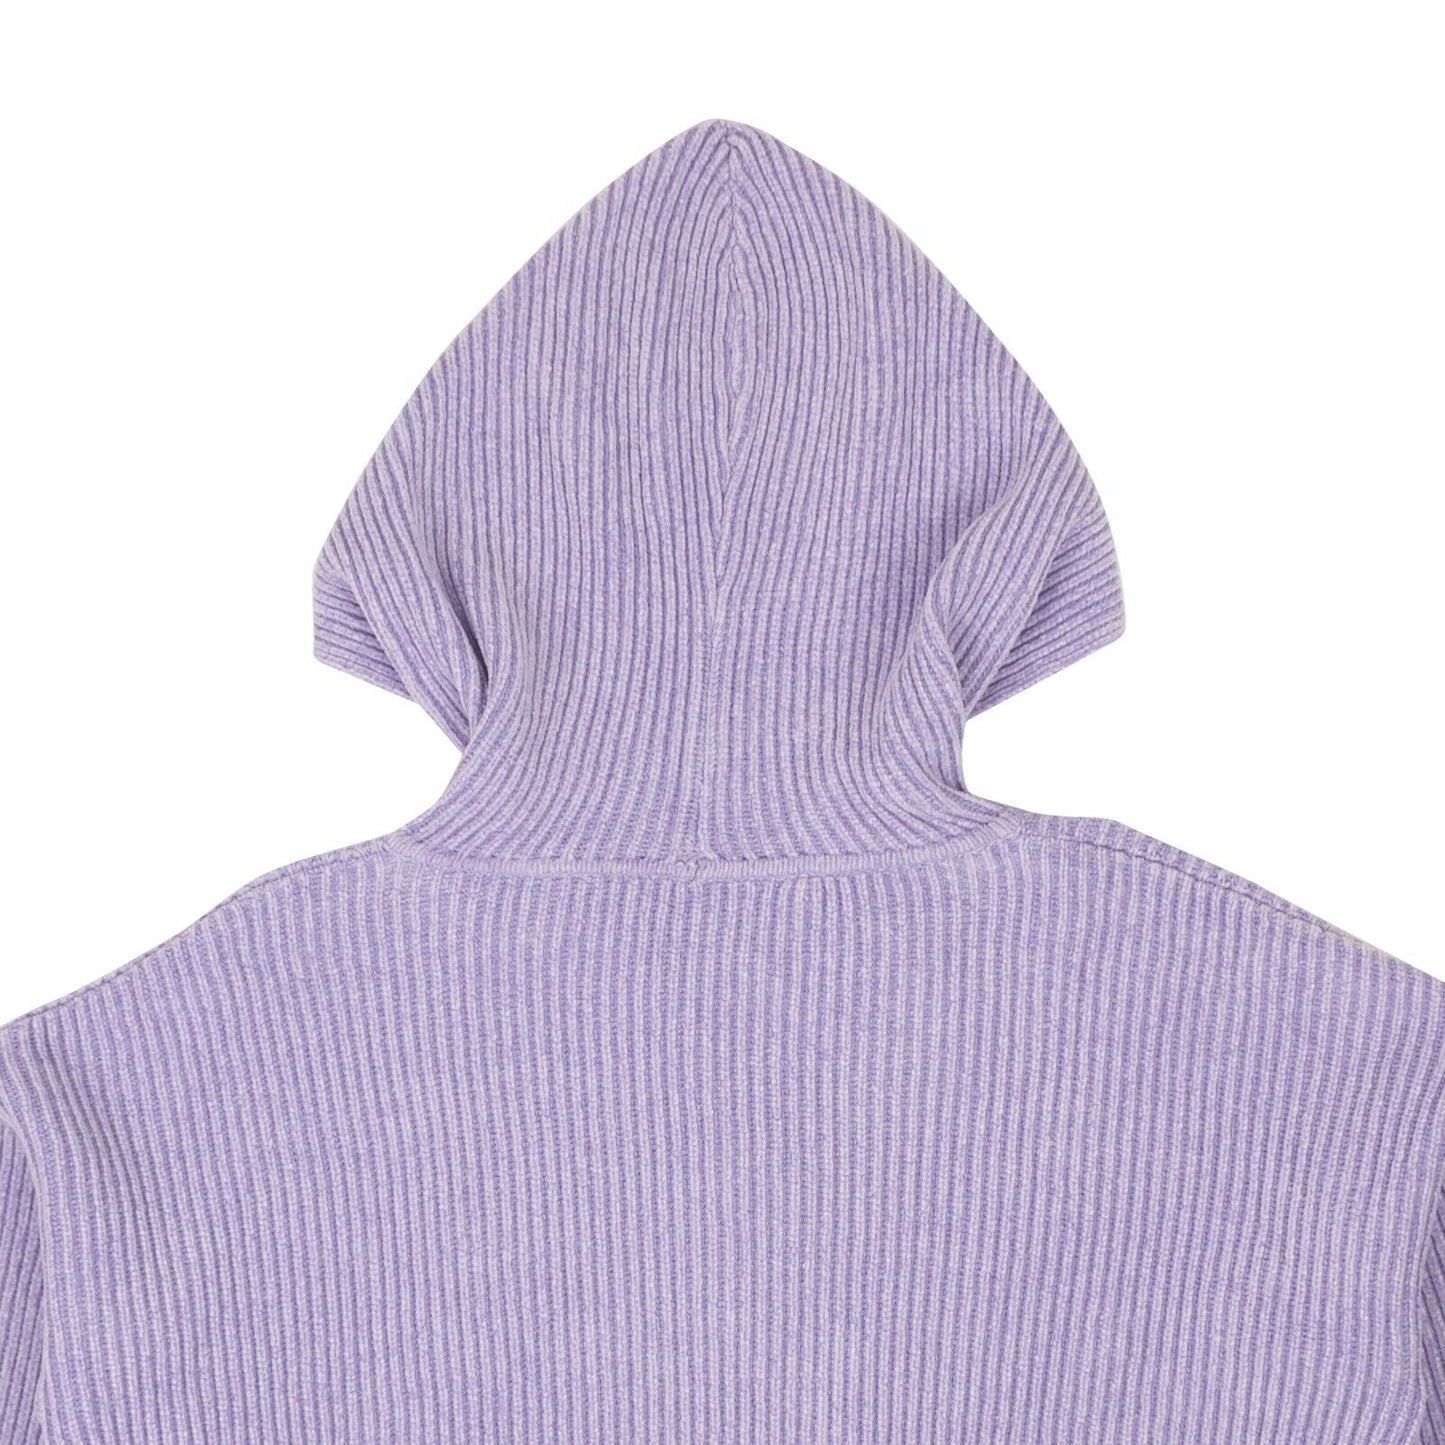 Palm Angels Pxp Hoodie Sweater - Lilac